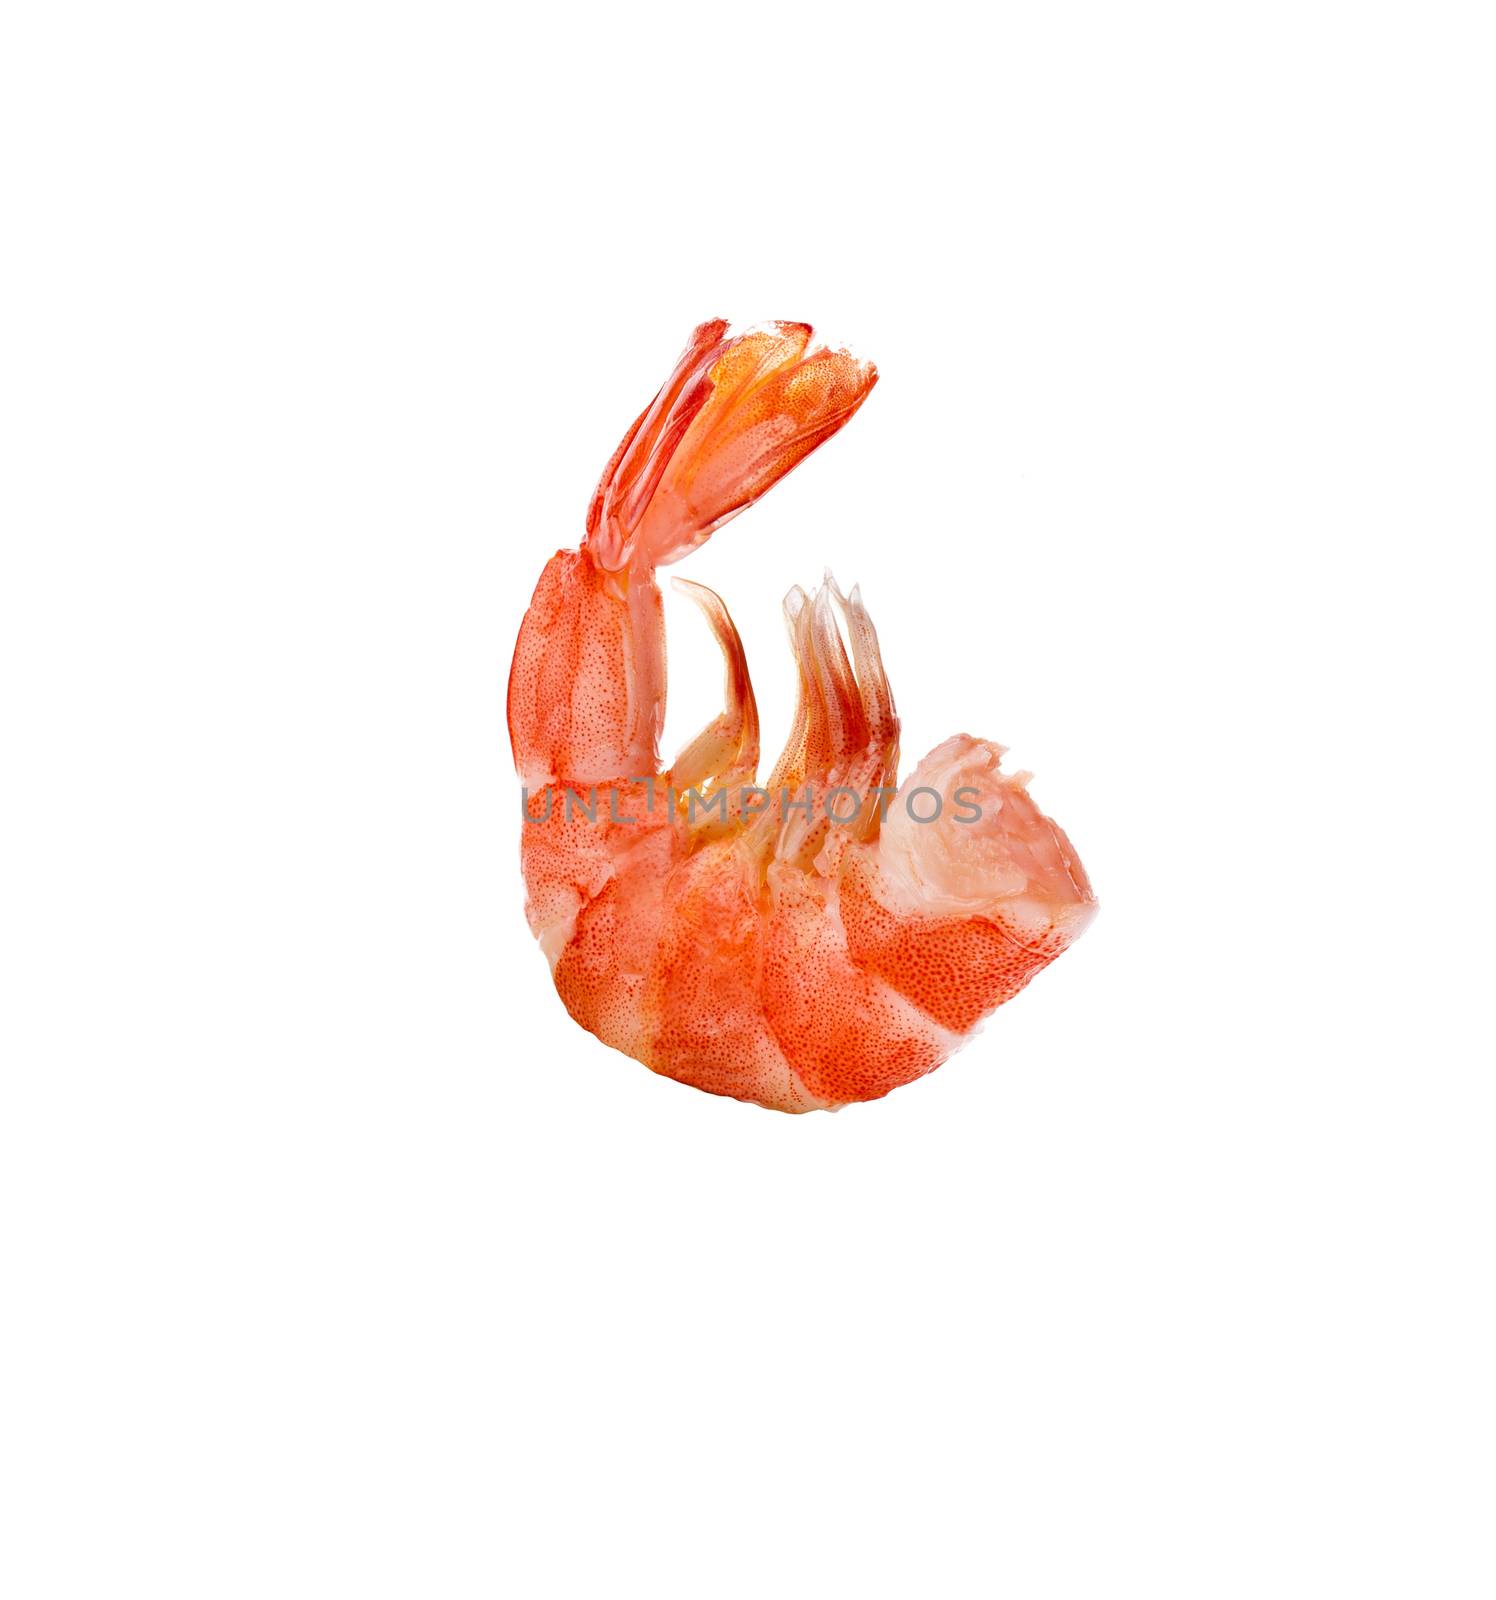 tiger shrimp isolated on white by ozaiachin